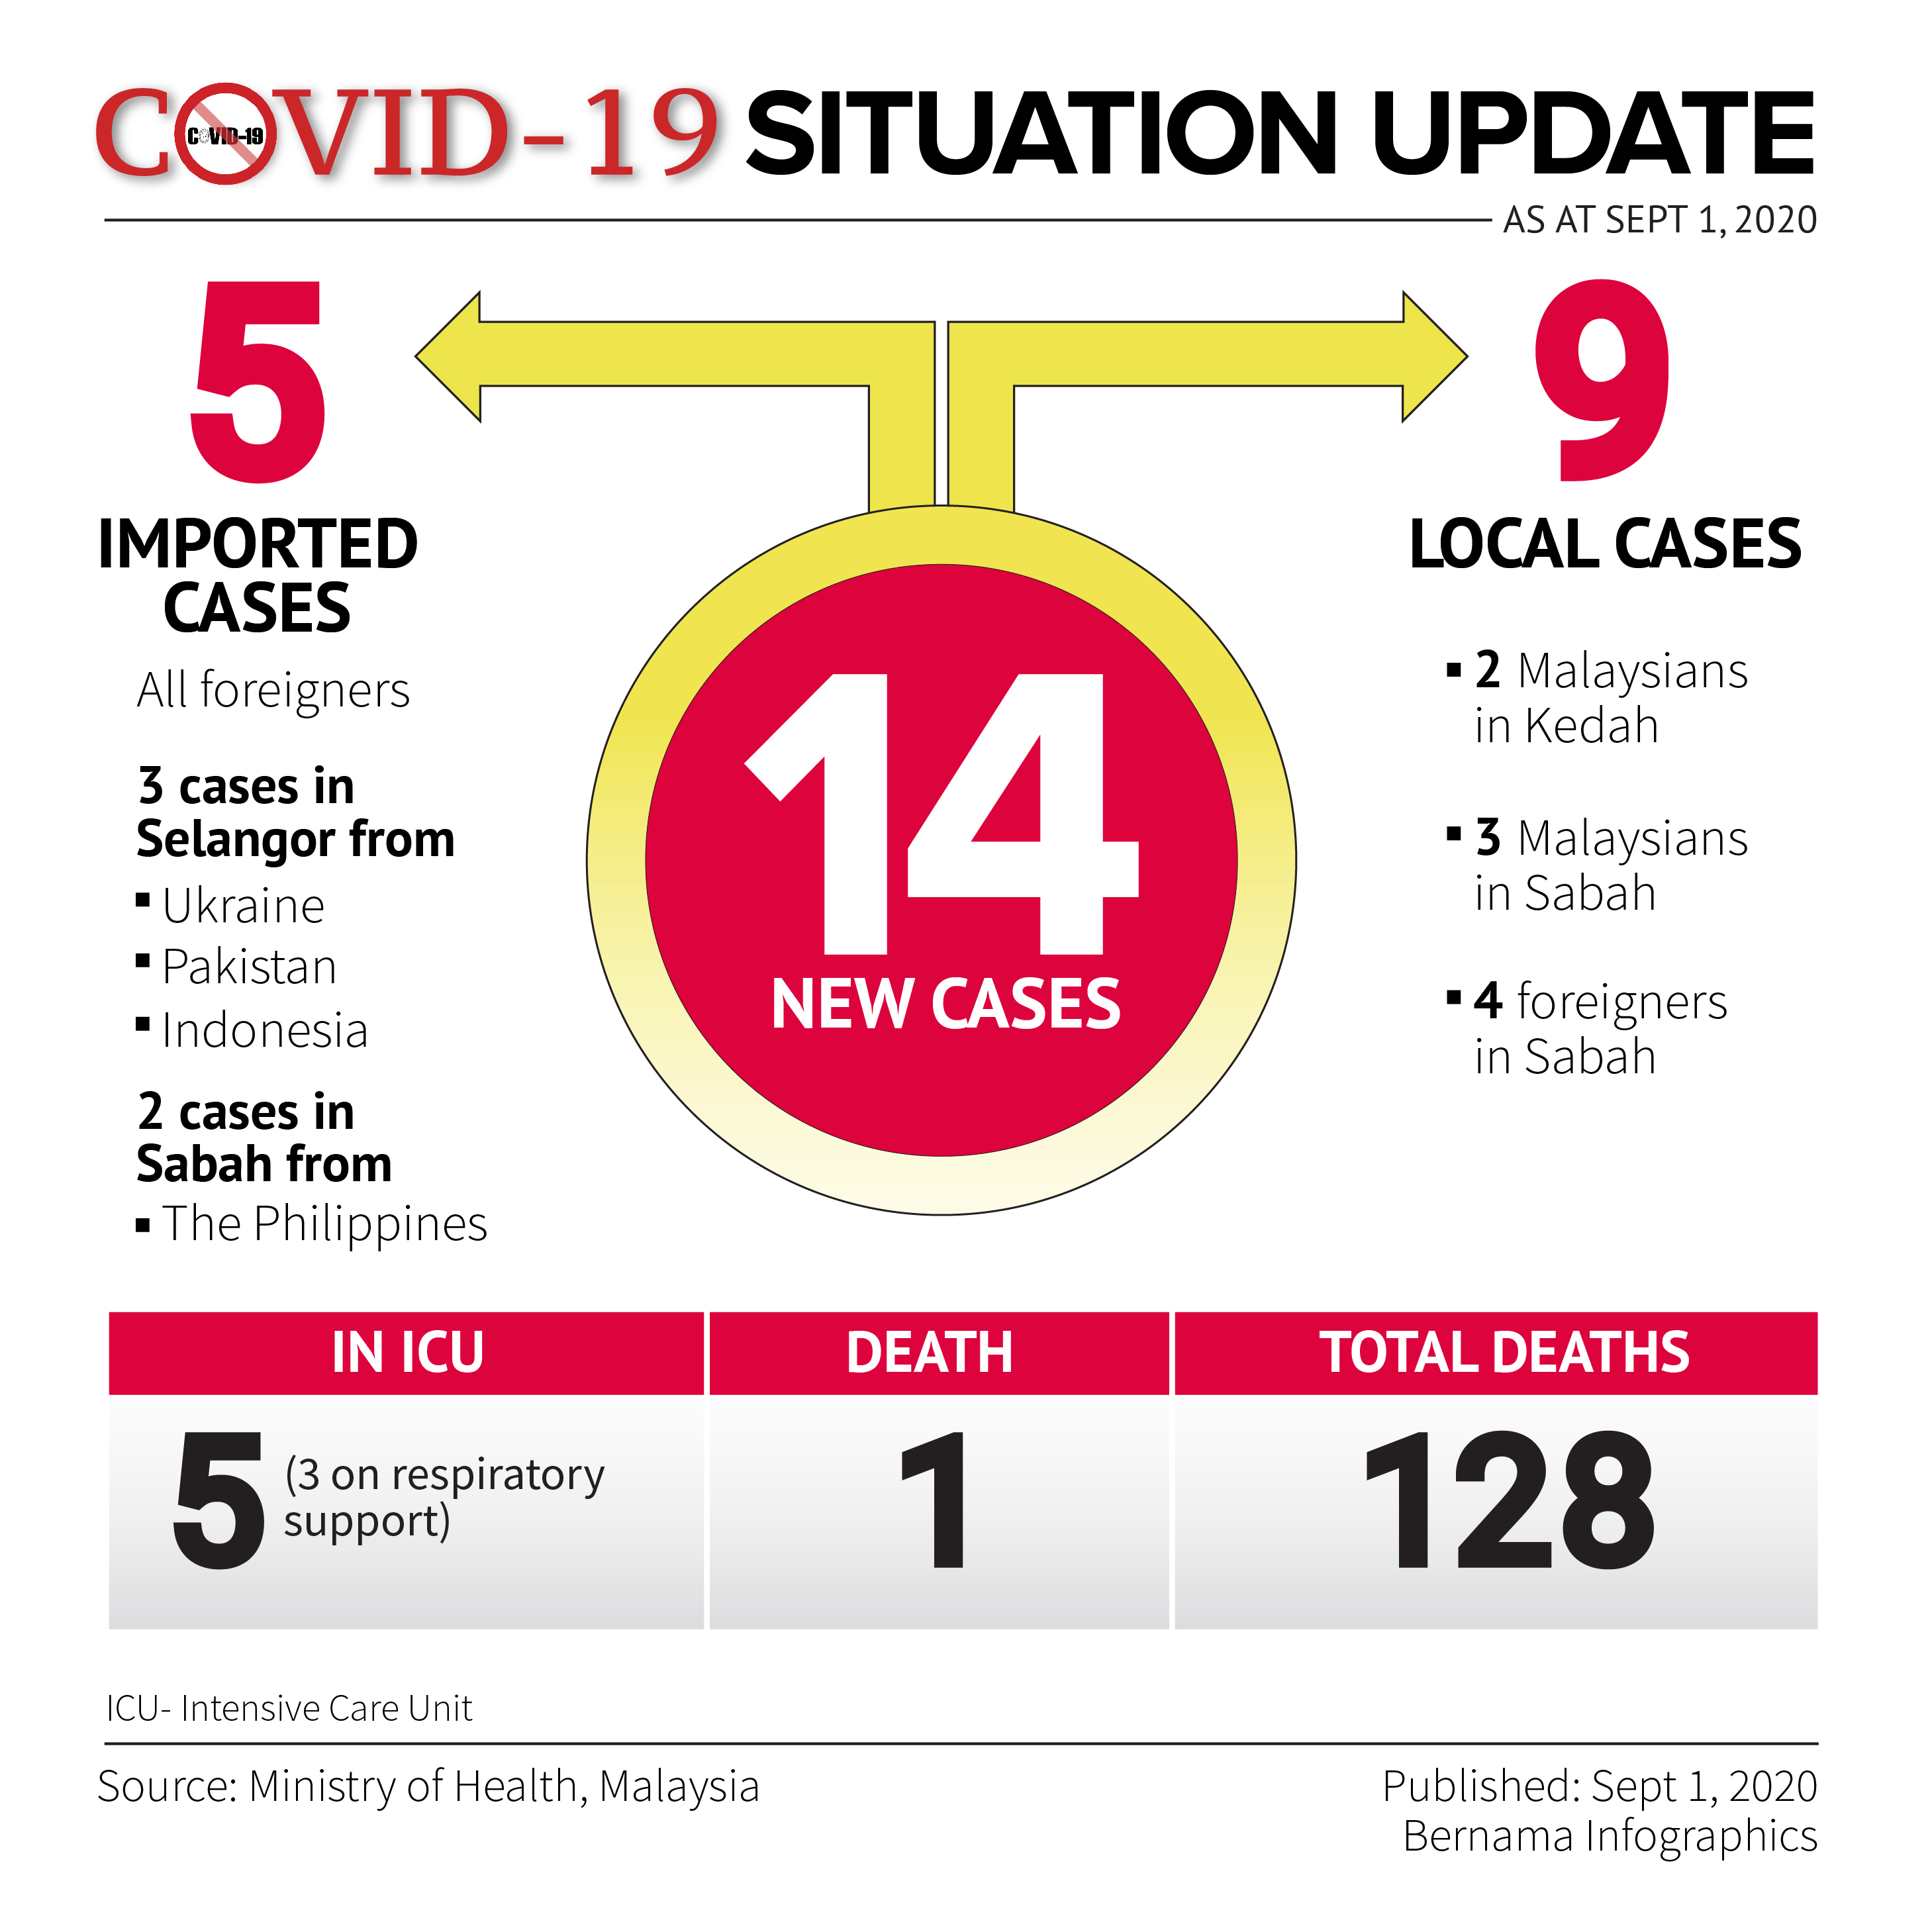 Malaysia reports one more death and 14 new COVID-19 cases